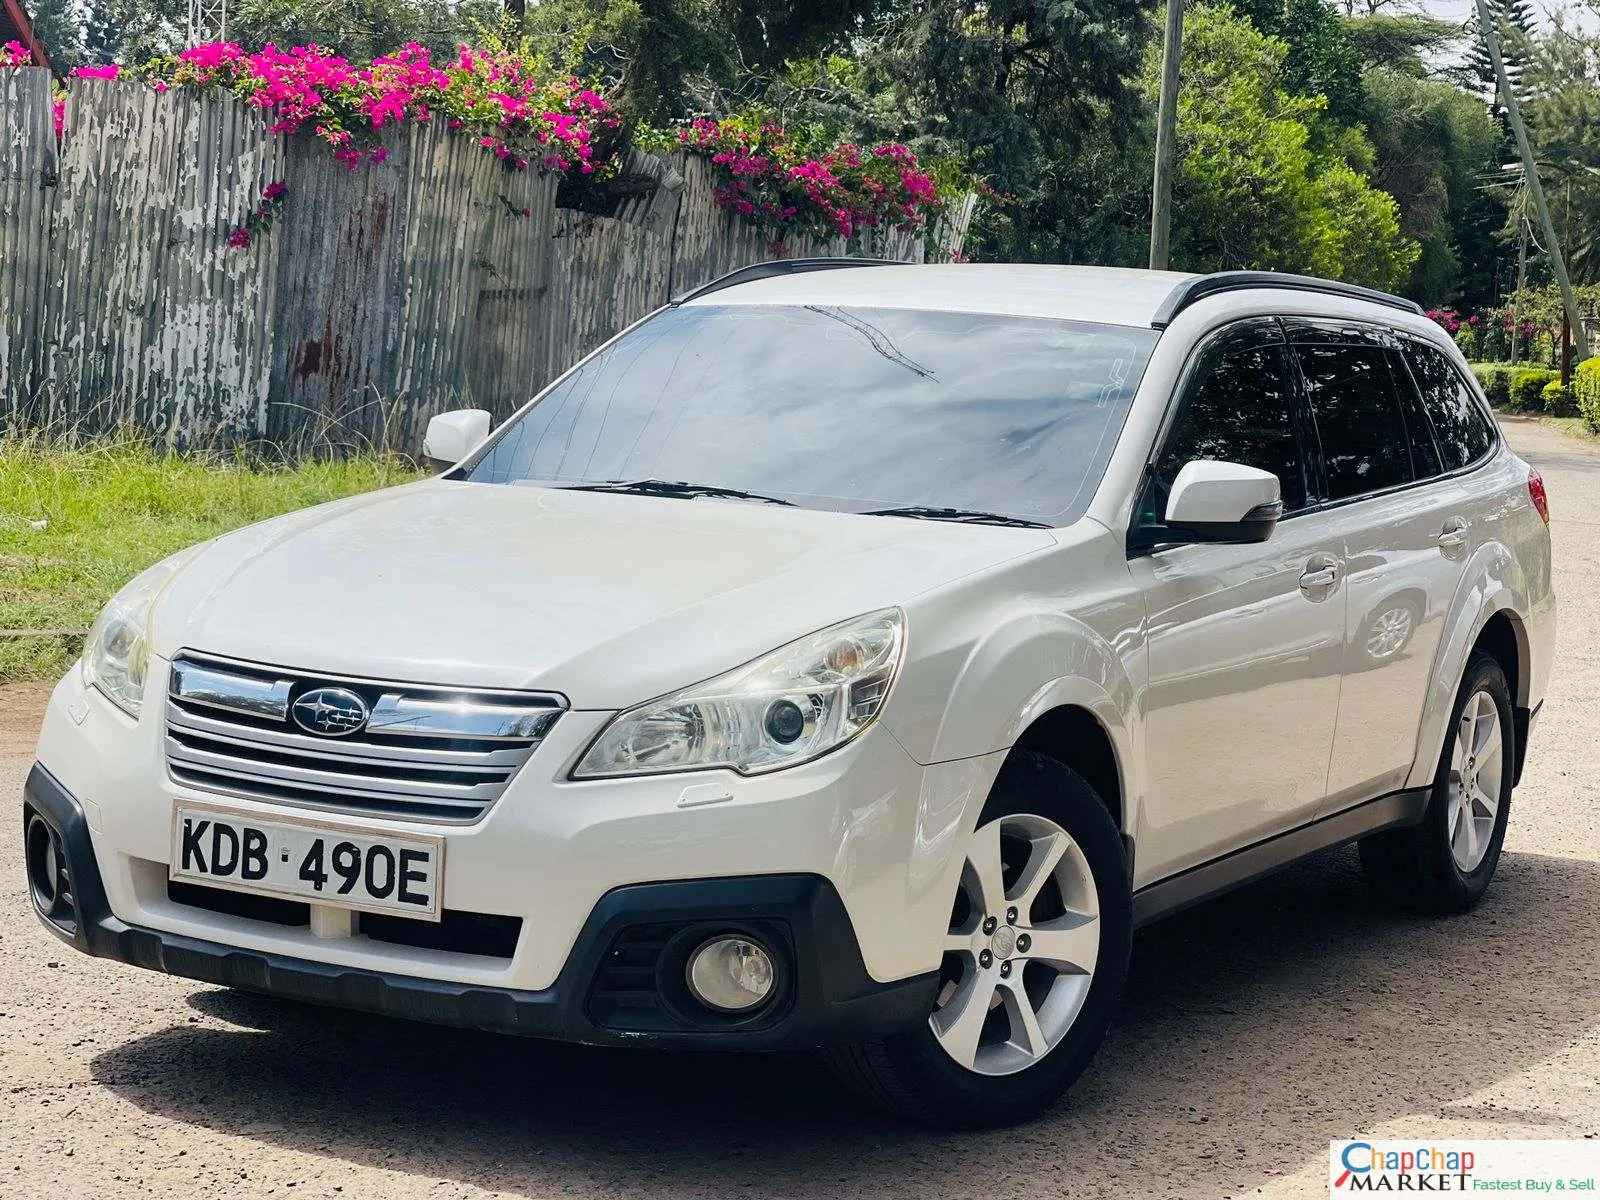 Cars Cars For Sale-Subaru OUTBACK for sale in kenya hire purchase installments You Pay 30% Deposit Trade in Ok outback Kenya exclusive 8